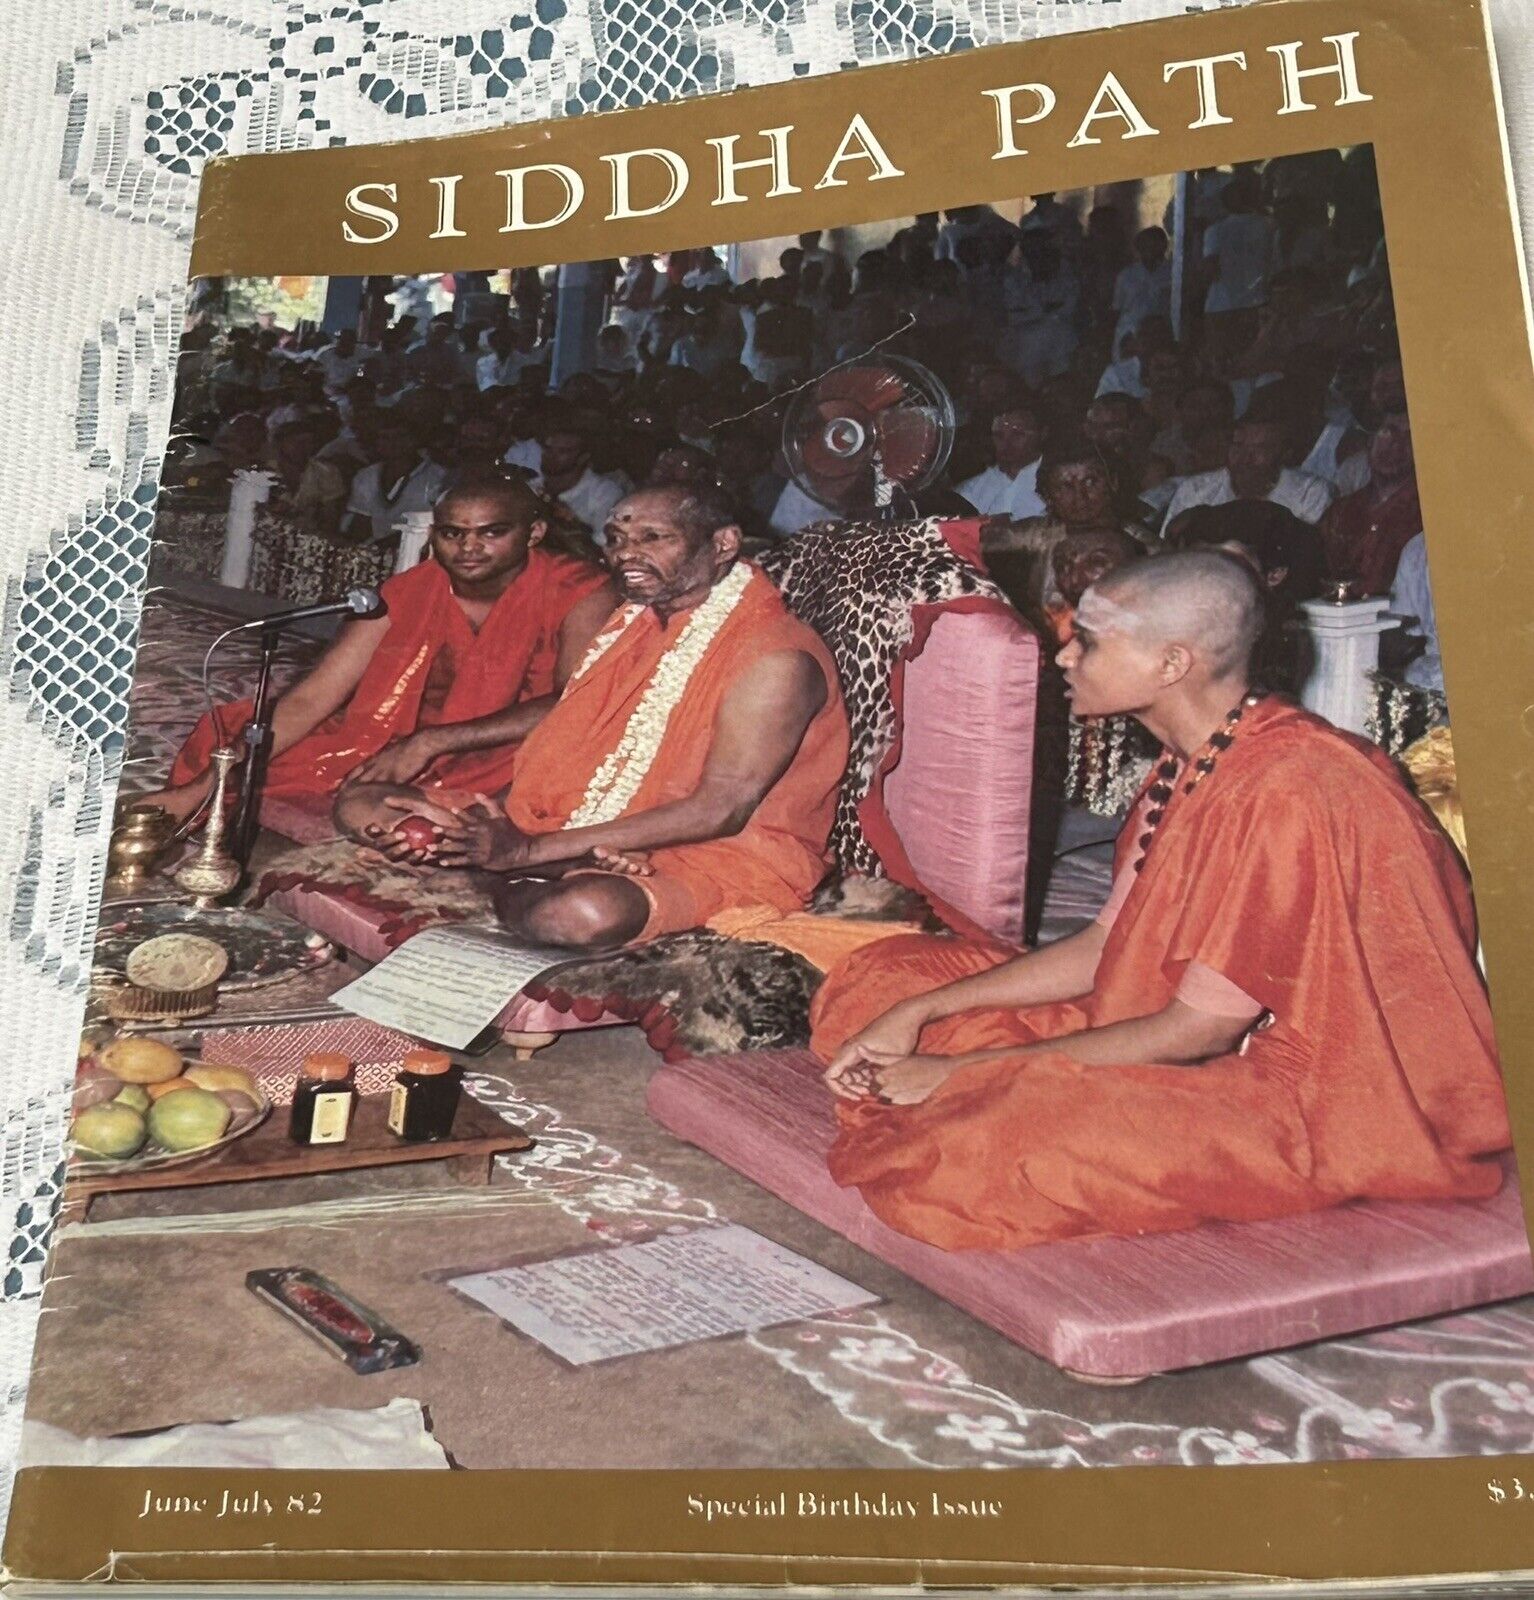 SIDDHA PATH June/July 1982 The Passing Of The Siddha Lineage To The Successors